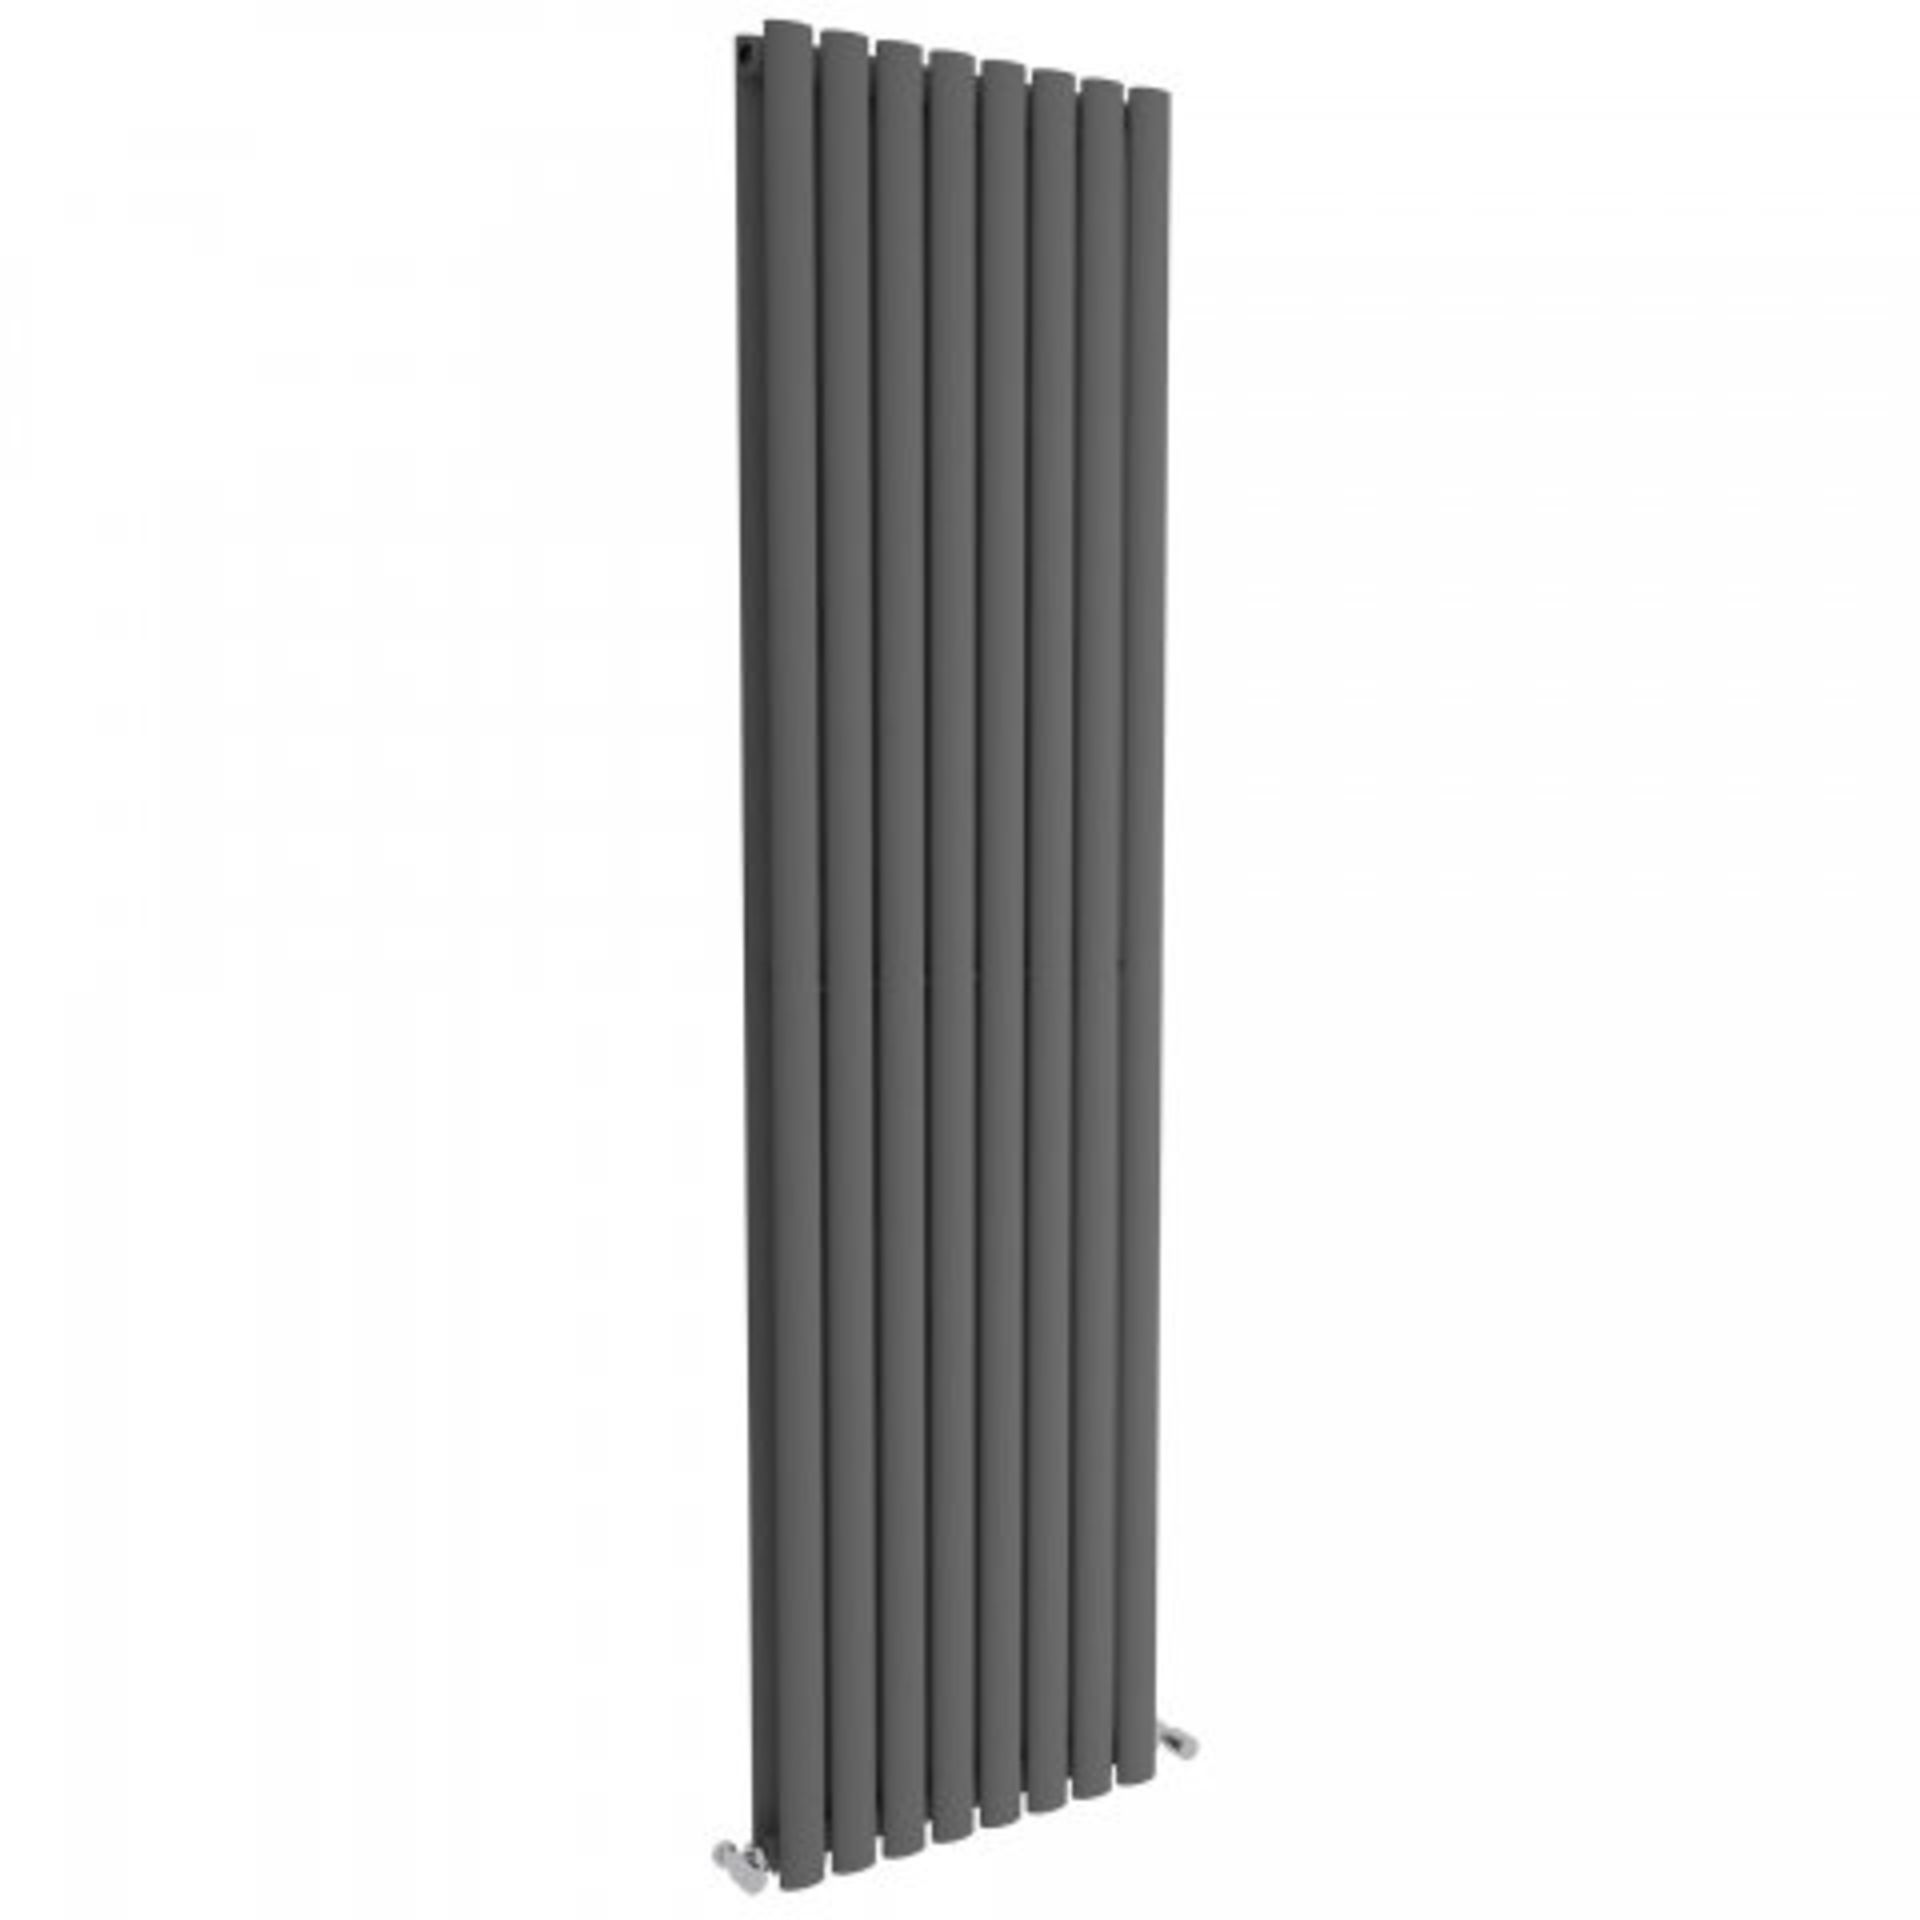 (K73) 1800x480mm Anthracite Double Oval Tube Vertical Radiator - Ember Premium. RRP £319.99. - Image 3 of 5